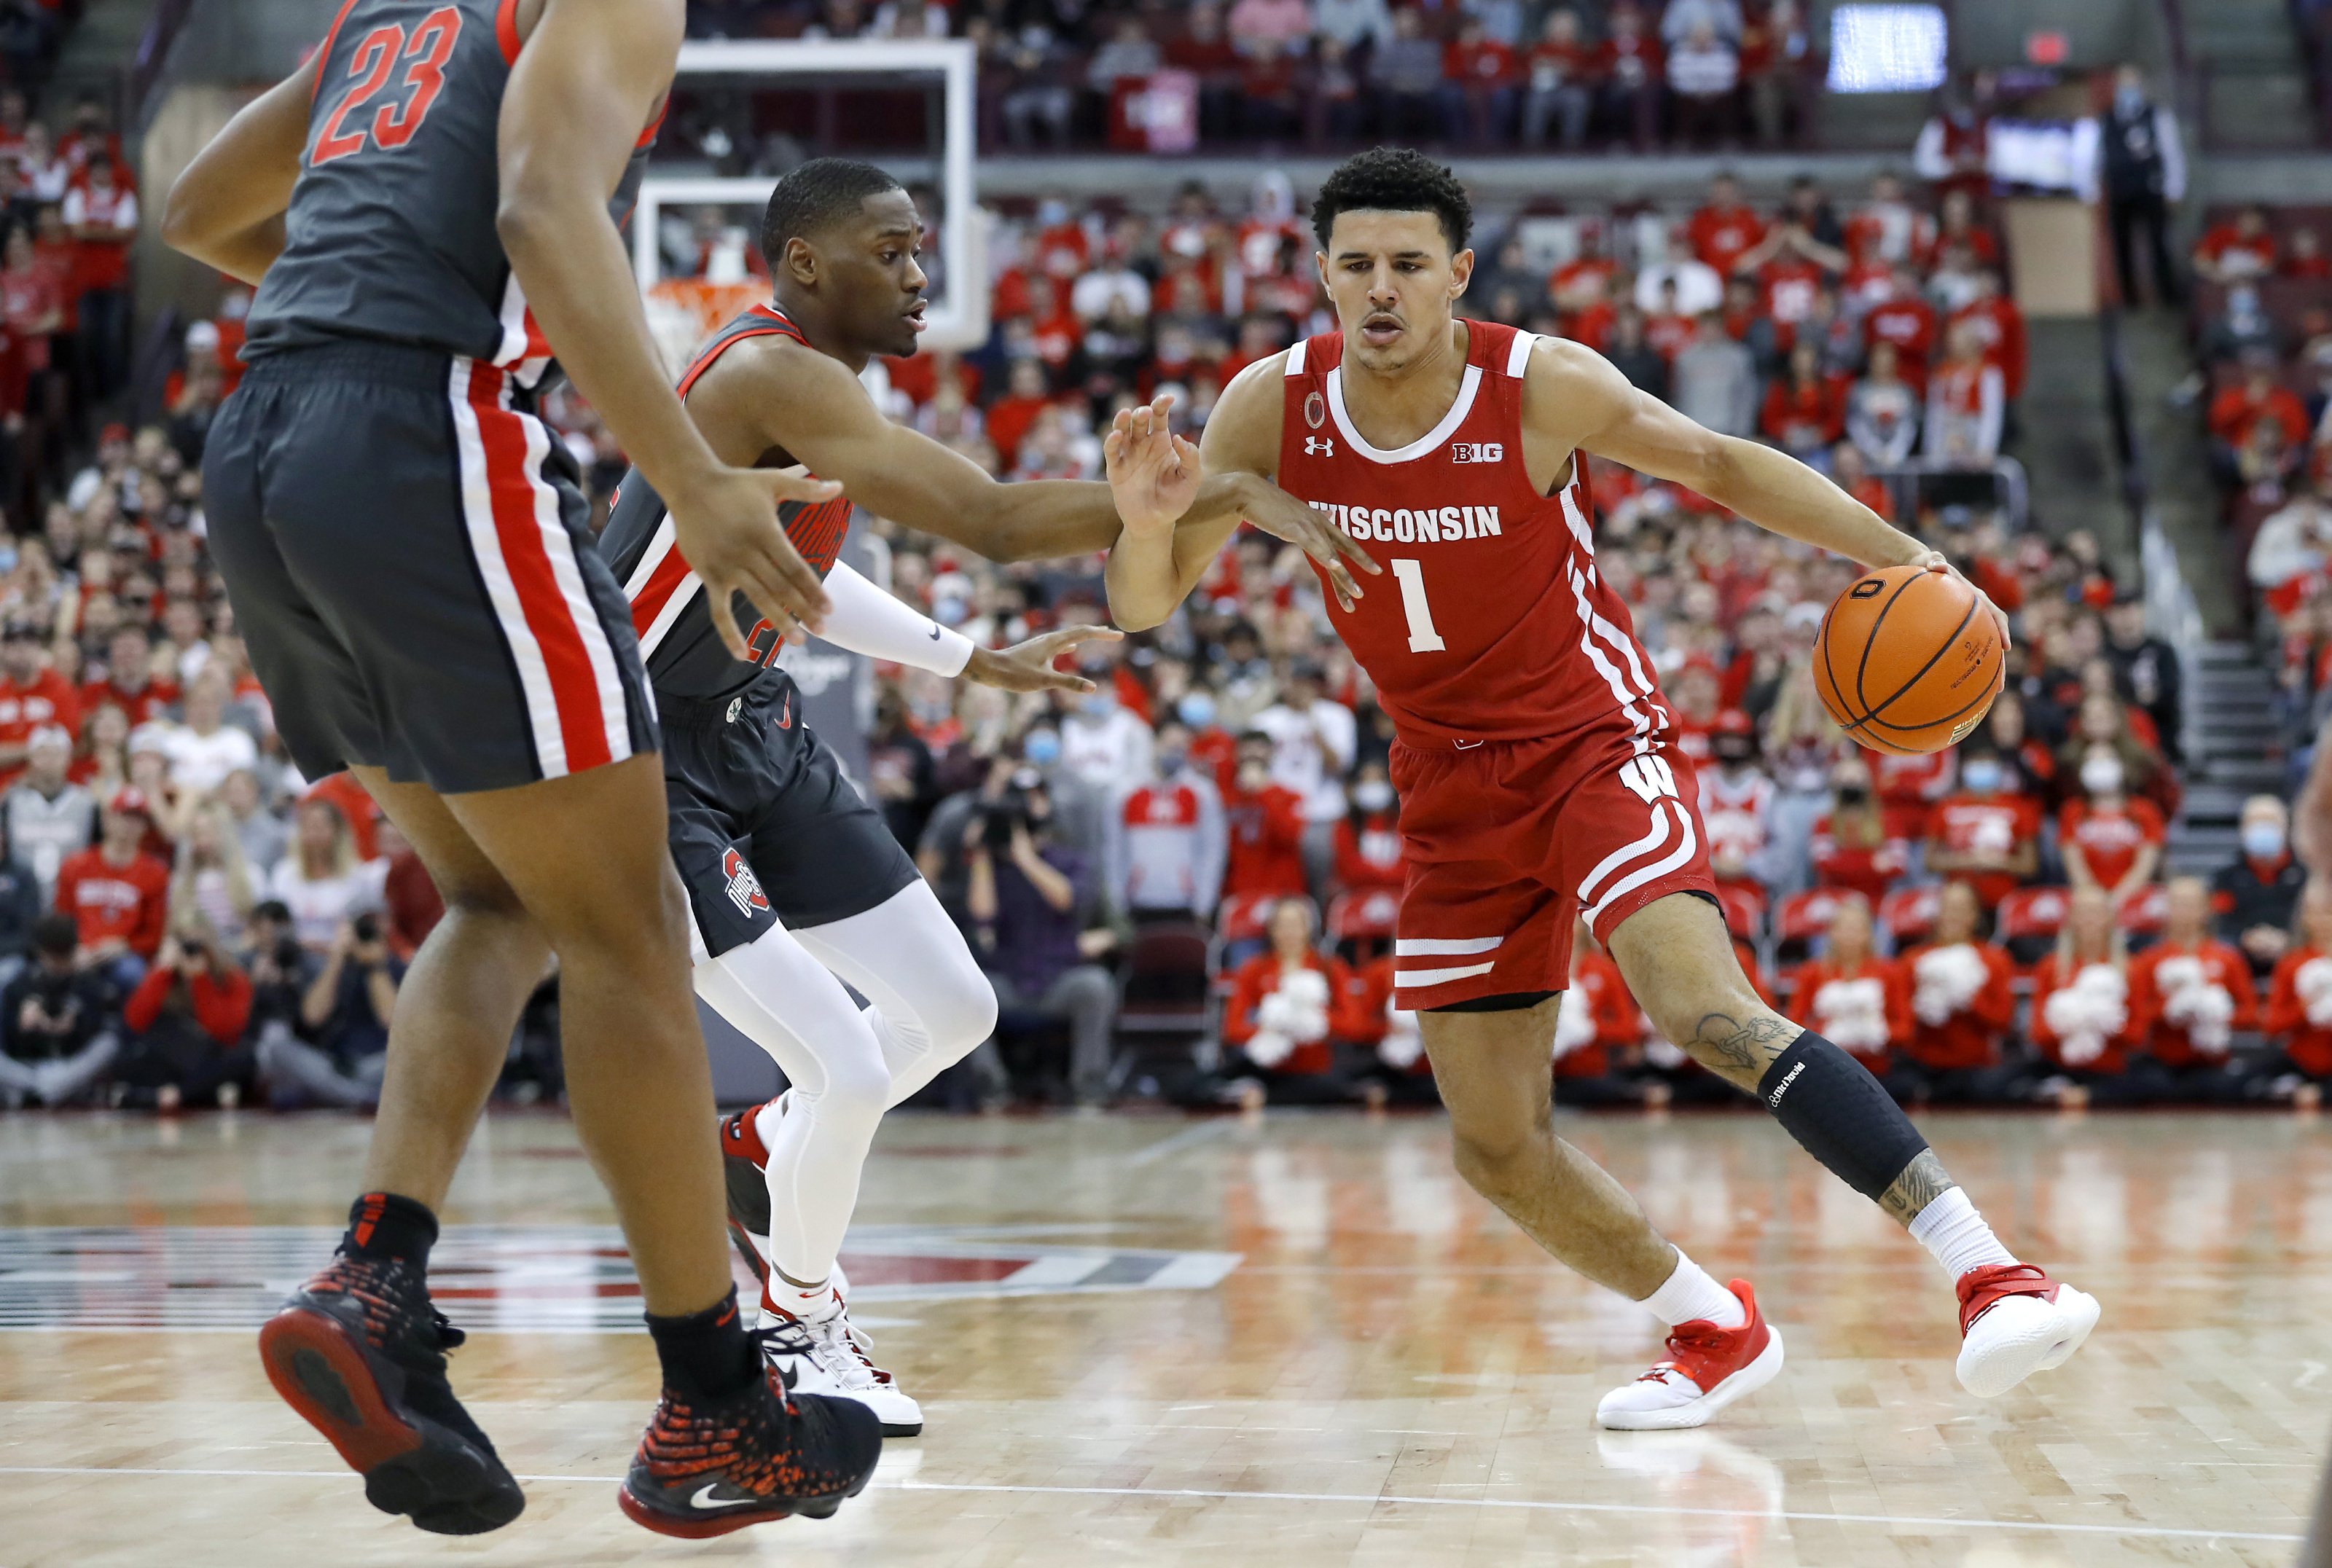 Wisconsin Game Today Wisconsin vs Nicholls, Predictions, Odds, TV Channel and Live Stream for Basketball Game Dec